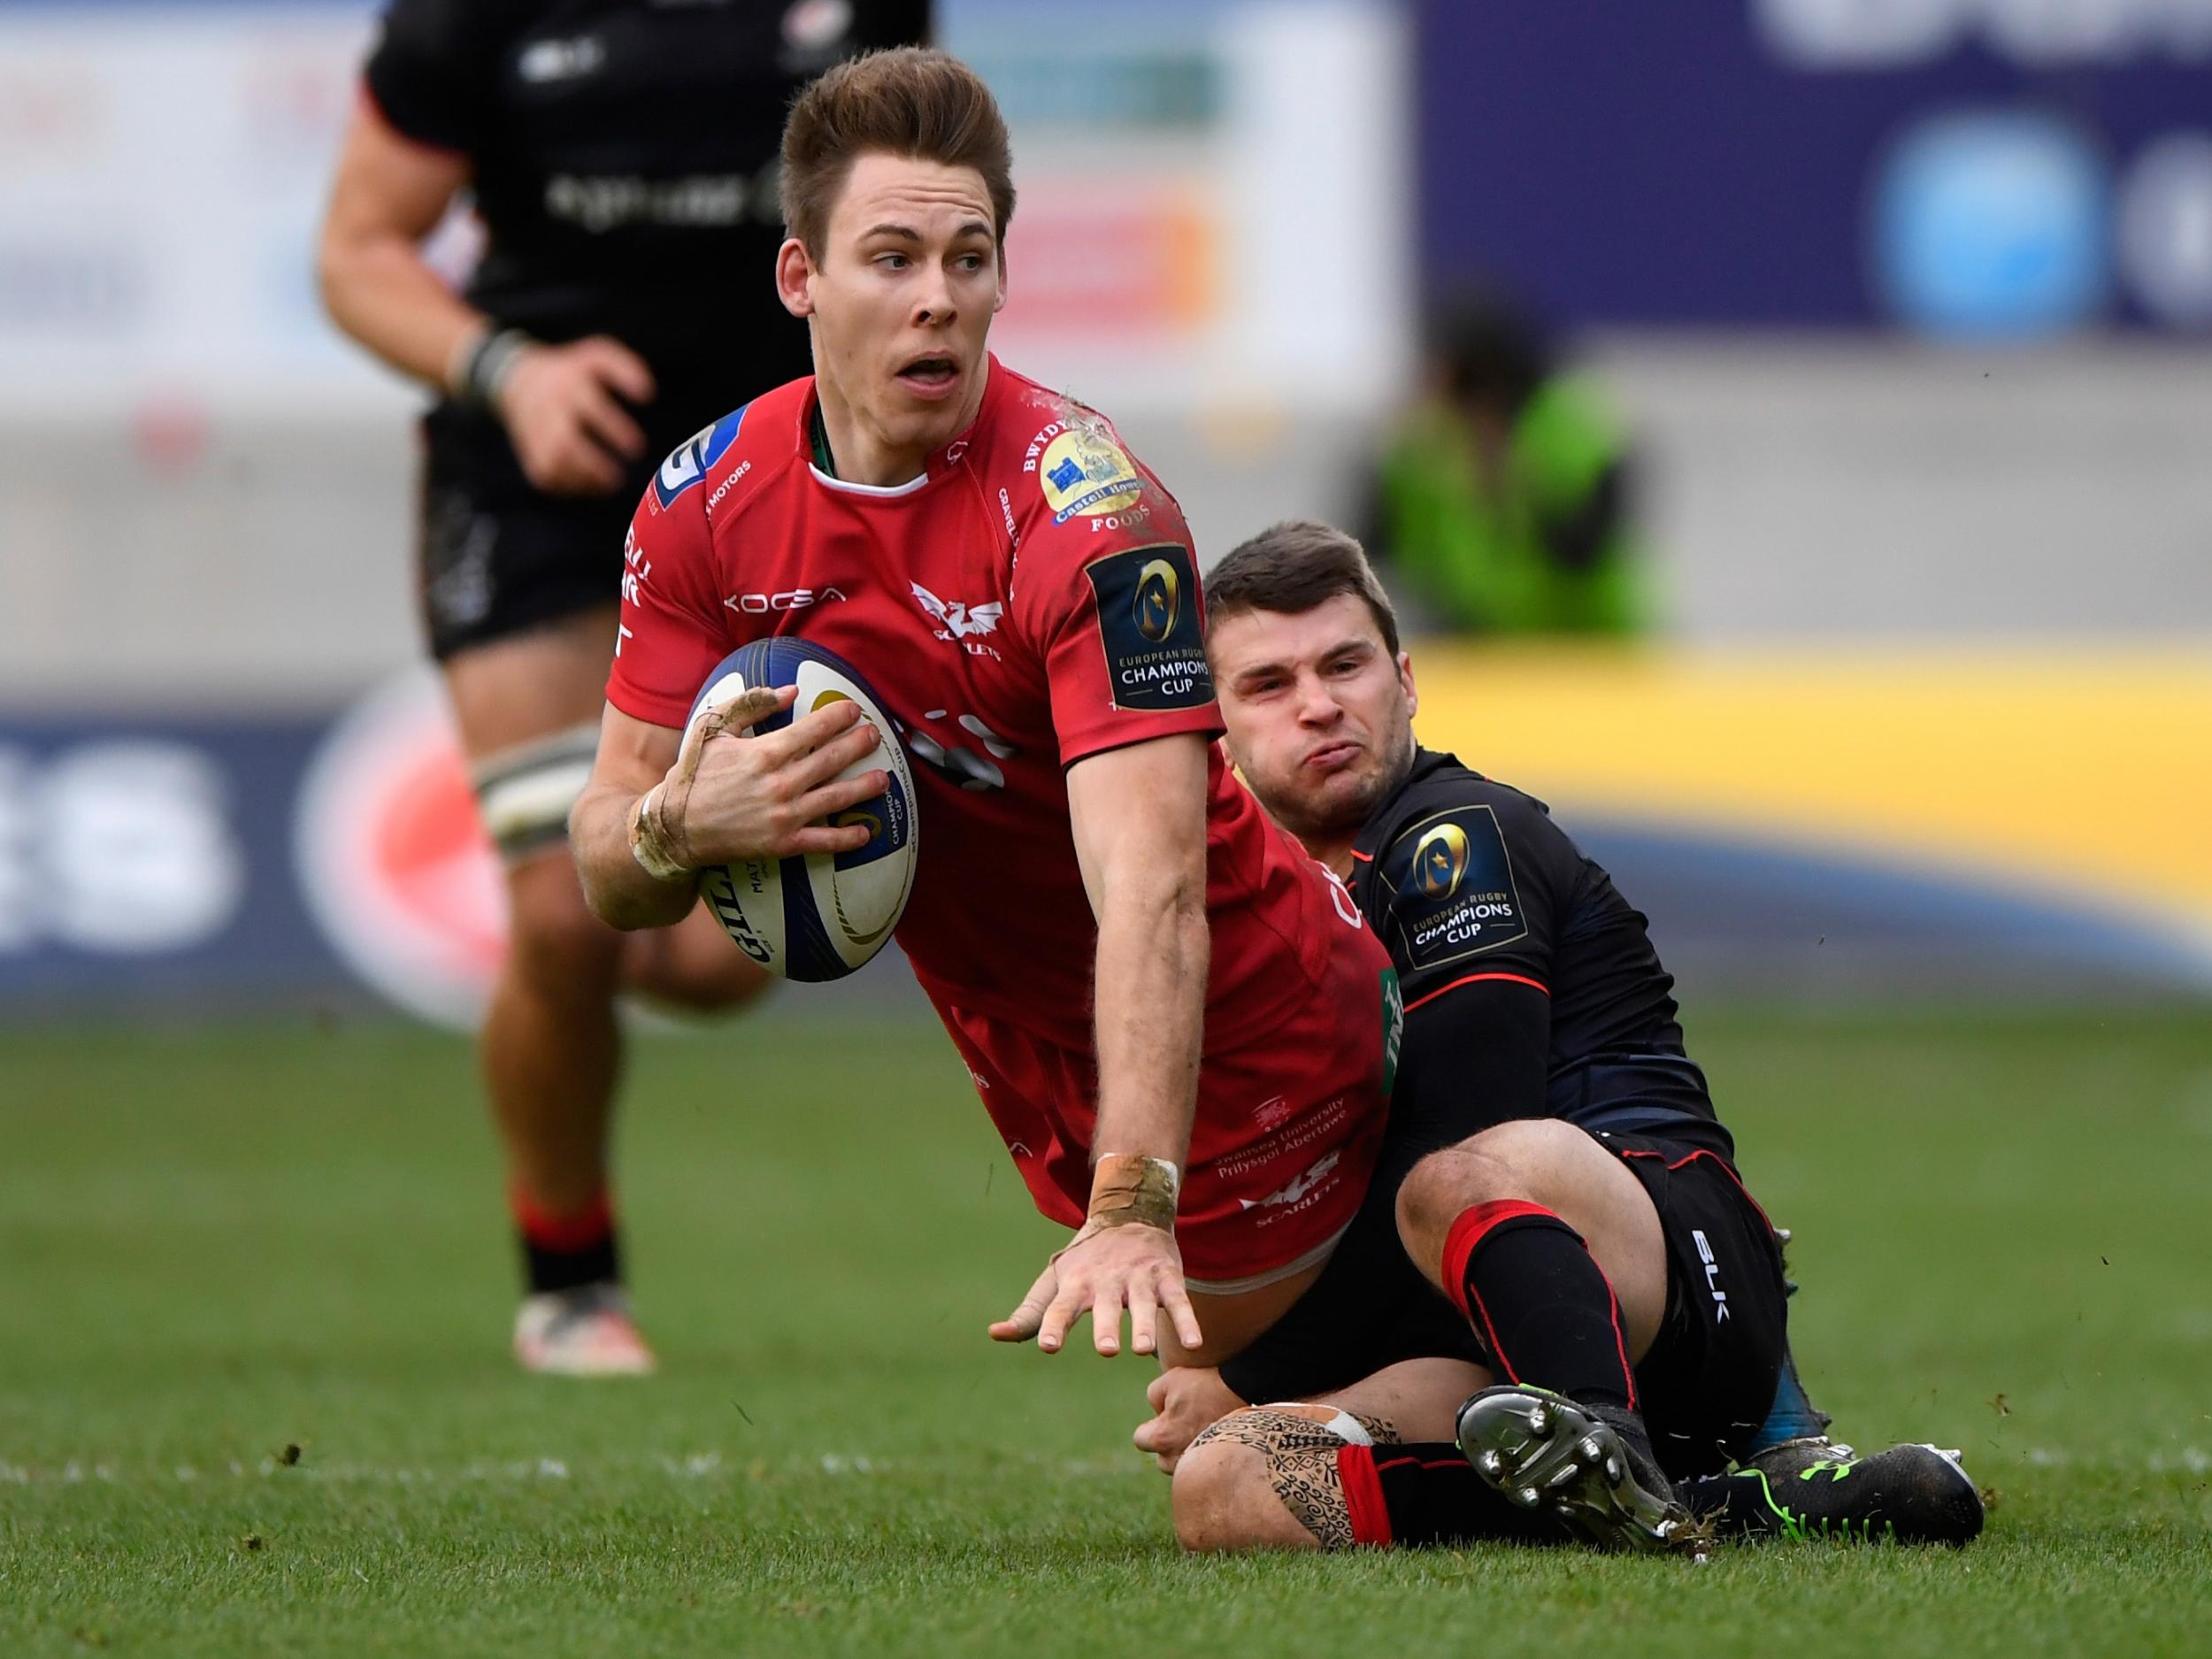 Liam Williams will join Sarries in the summer